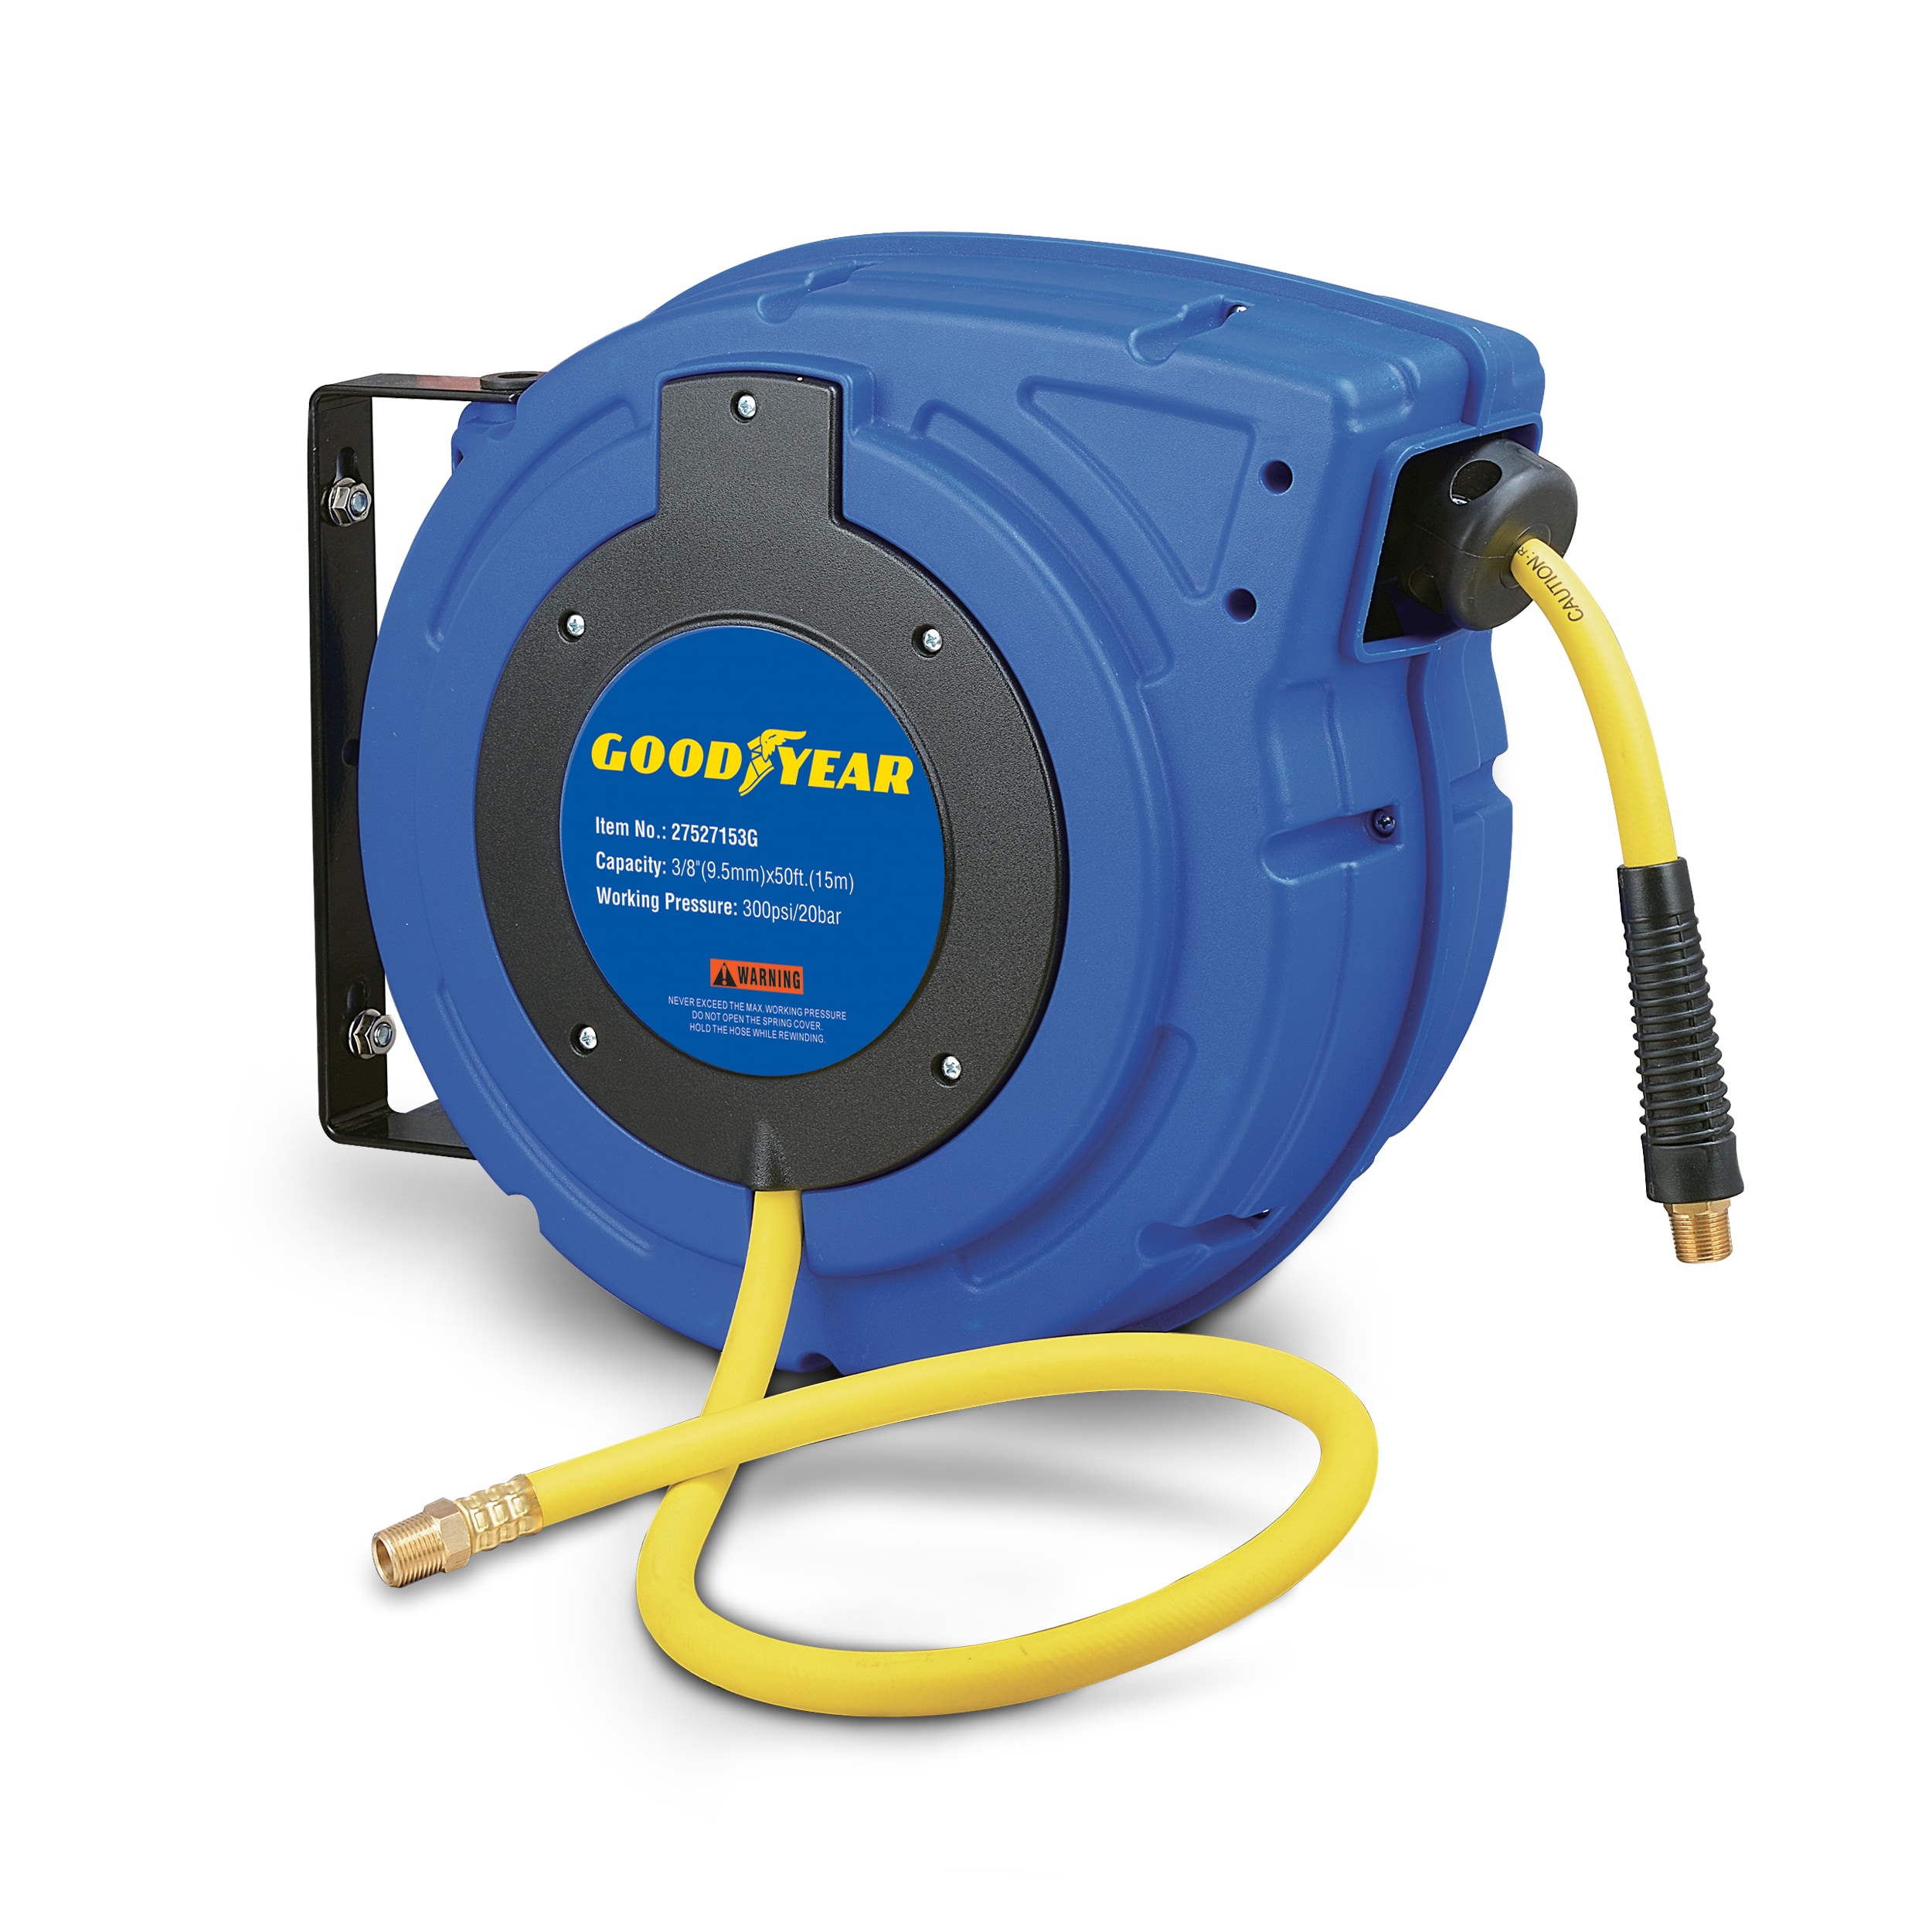 Goodyear Goodyear Mountable Retractable Air Hose Reel- 3/8in X 50ft, 3ft  Lead-in Hose, 1/4in Npt Connections in the Air Compressor Hoses department  at